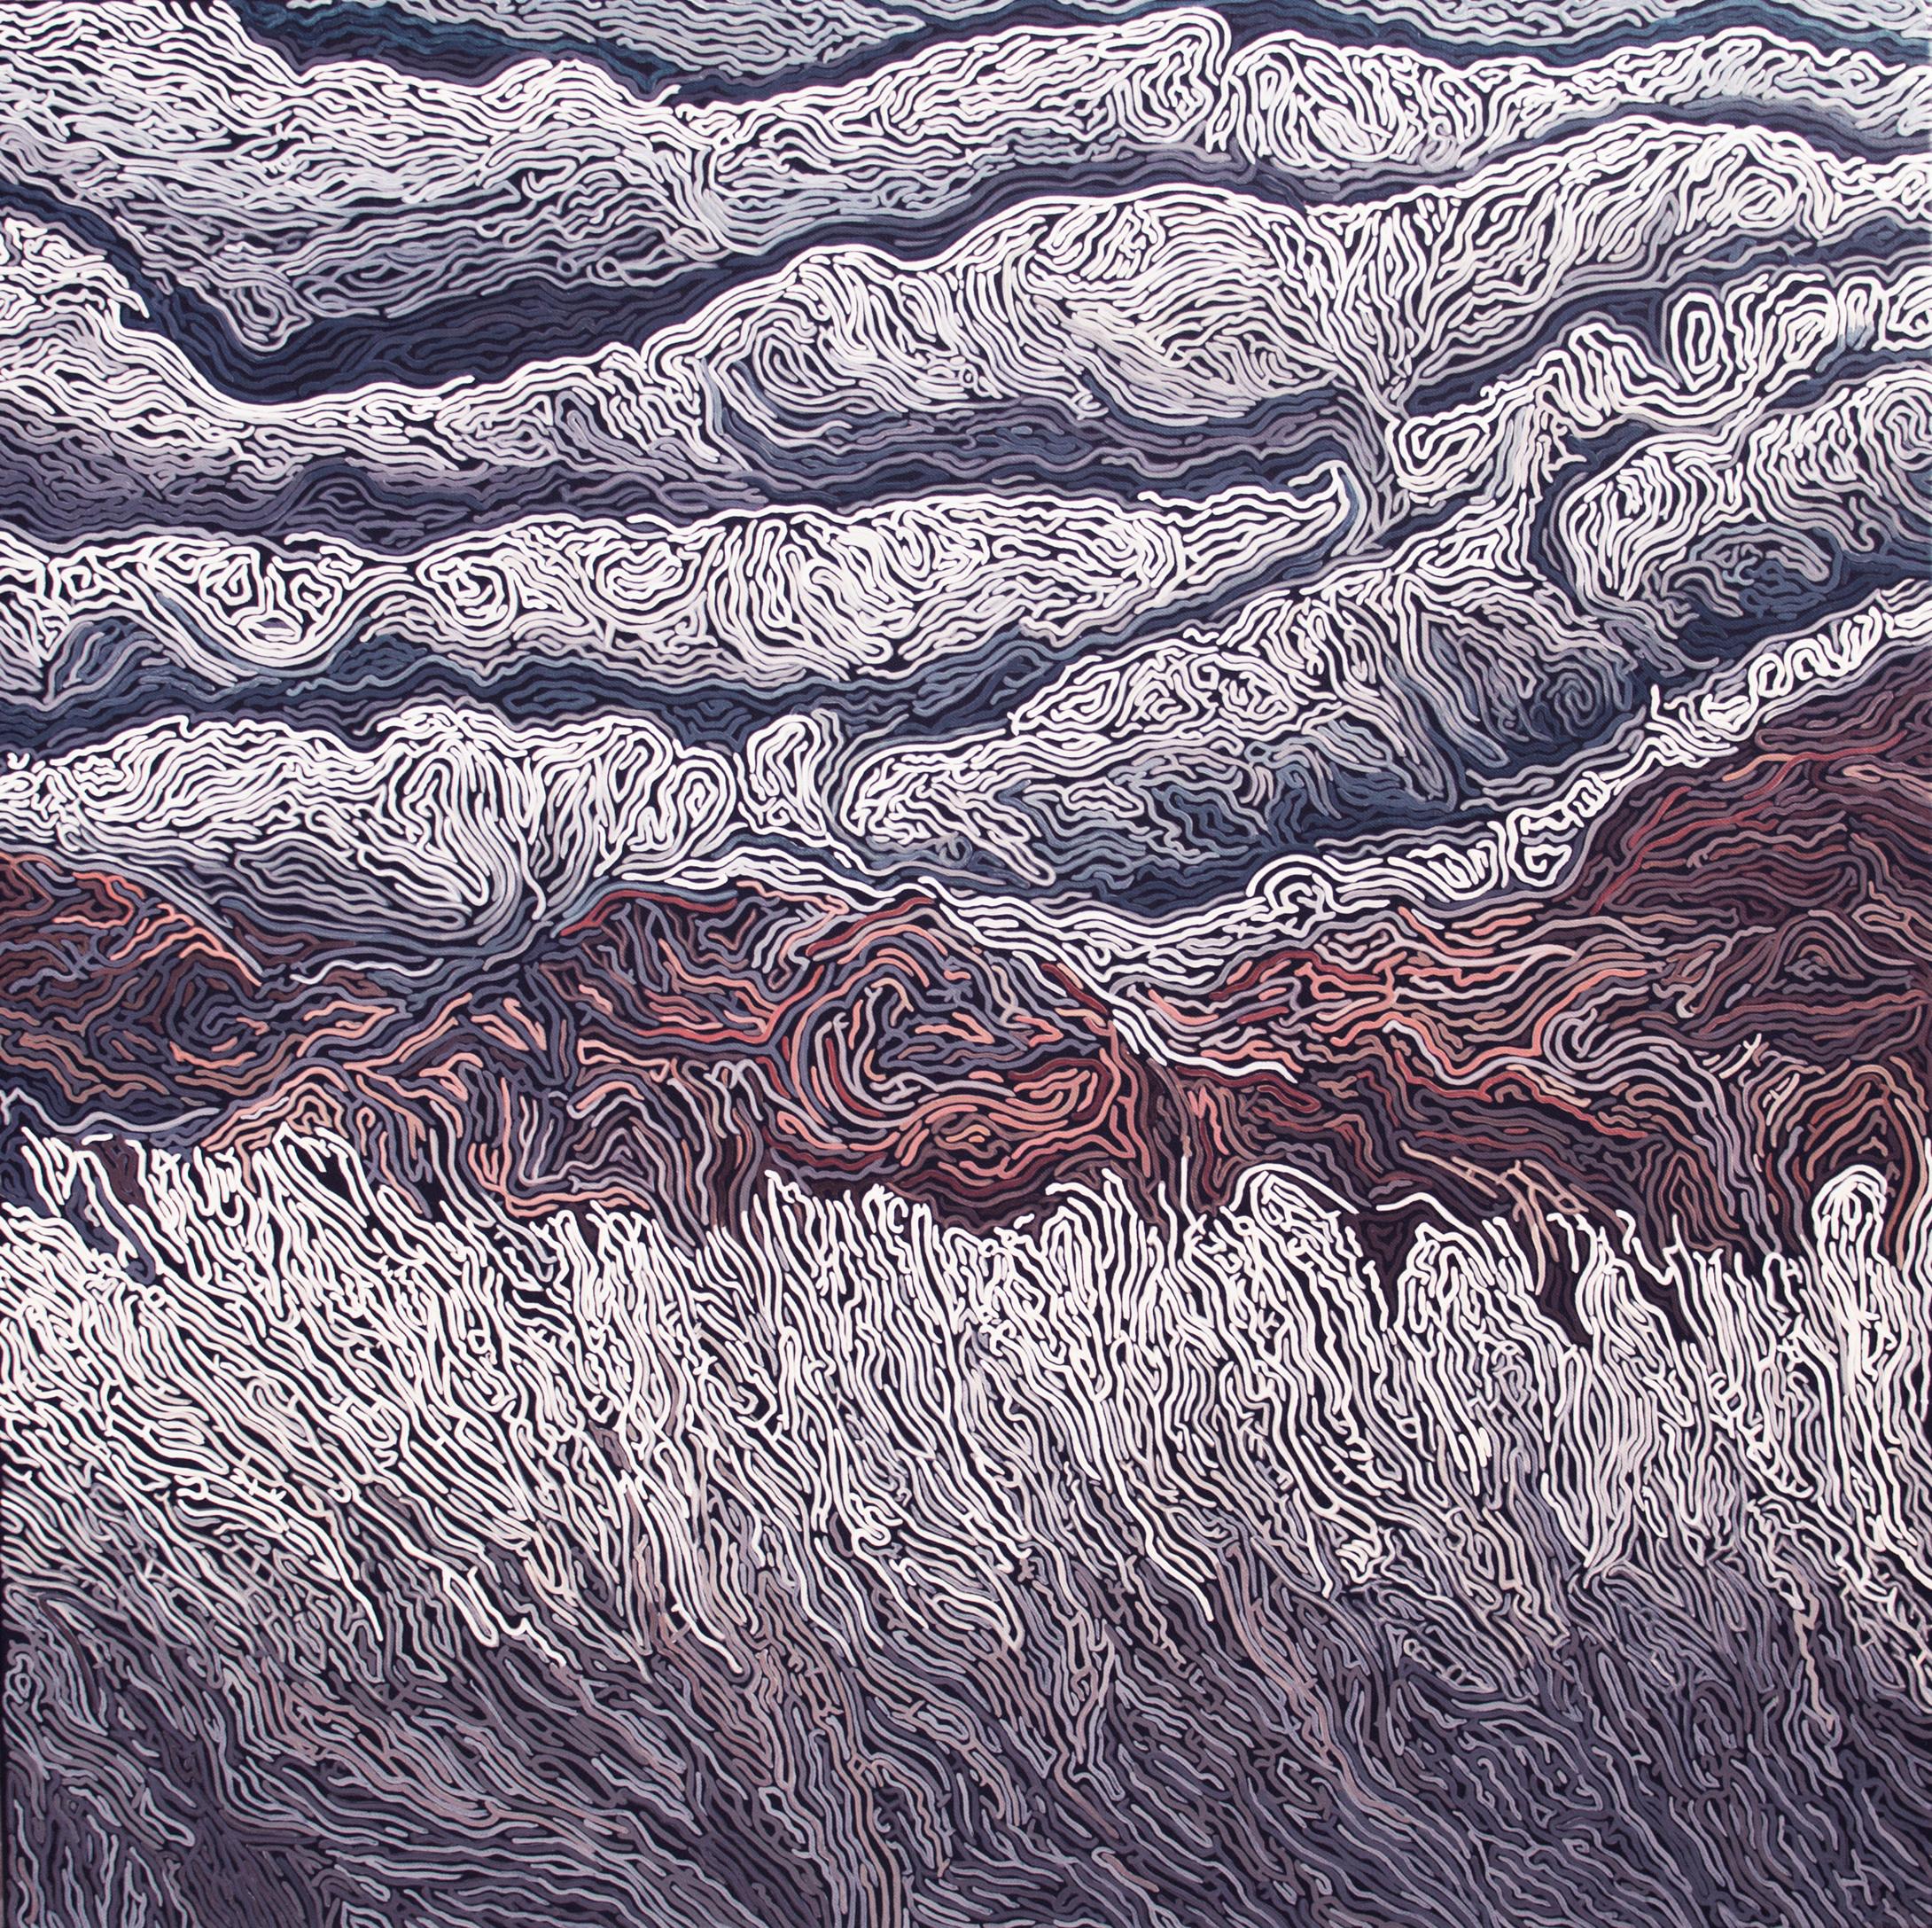  WINTER LINES - Painting by Diana Torje